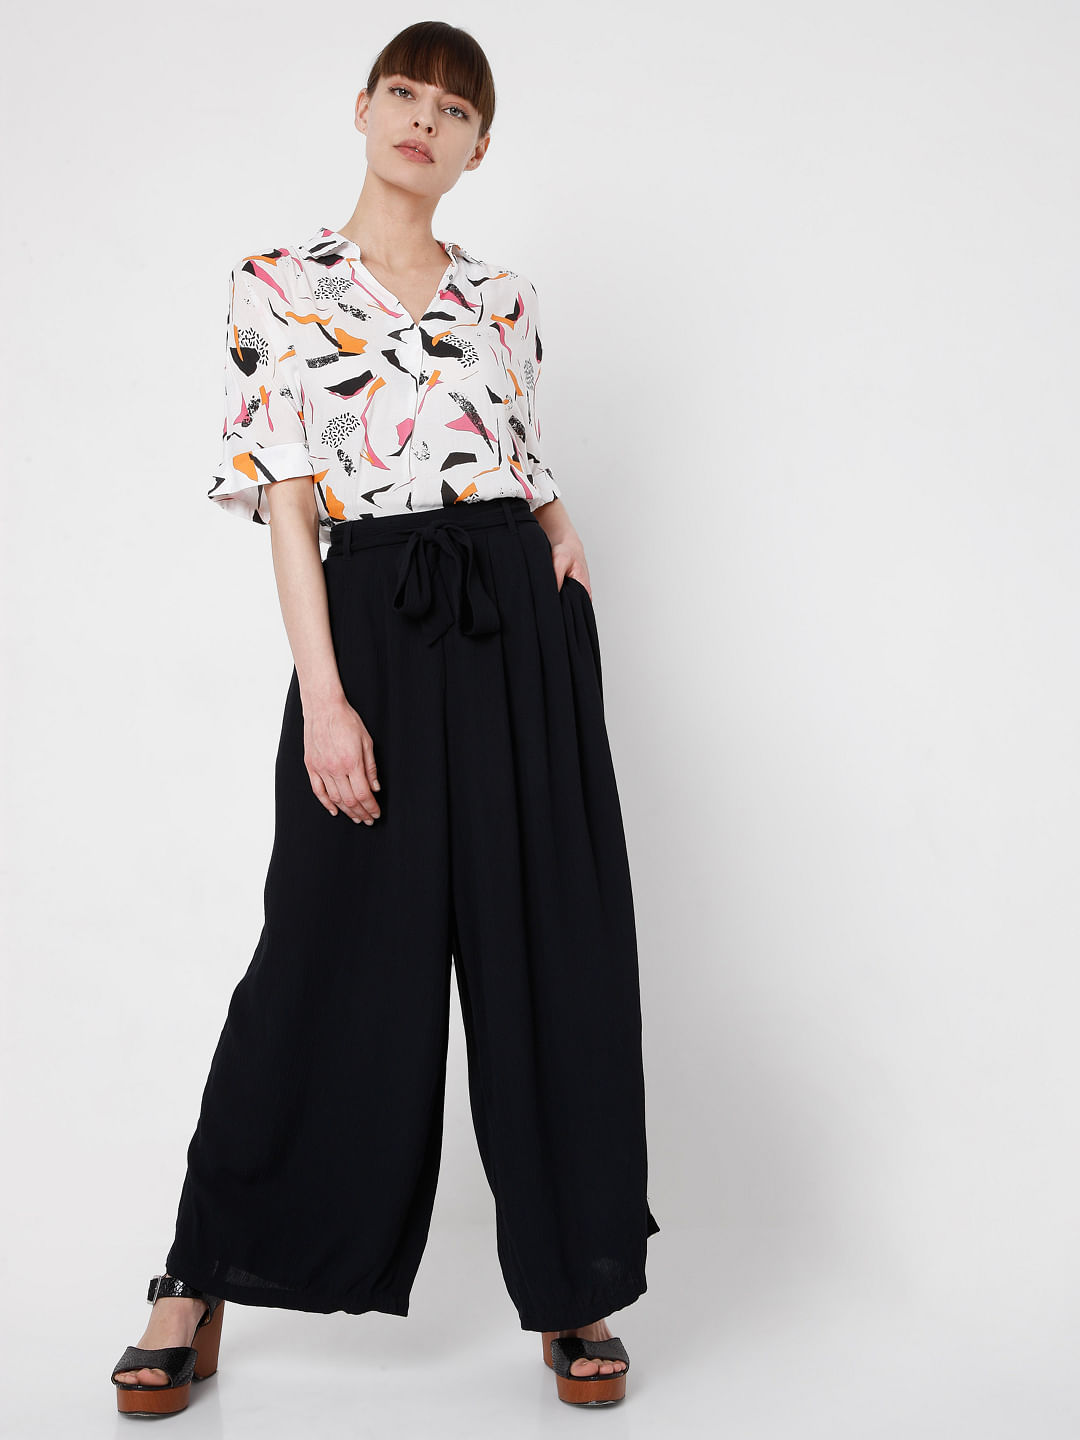 The 20 Best WideLeg Trousers for Petite Women  Who What Wear UK